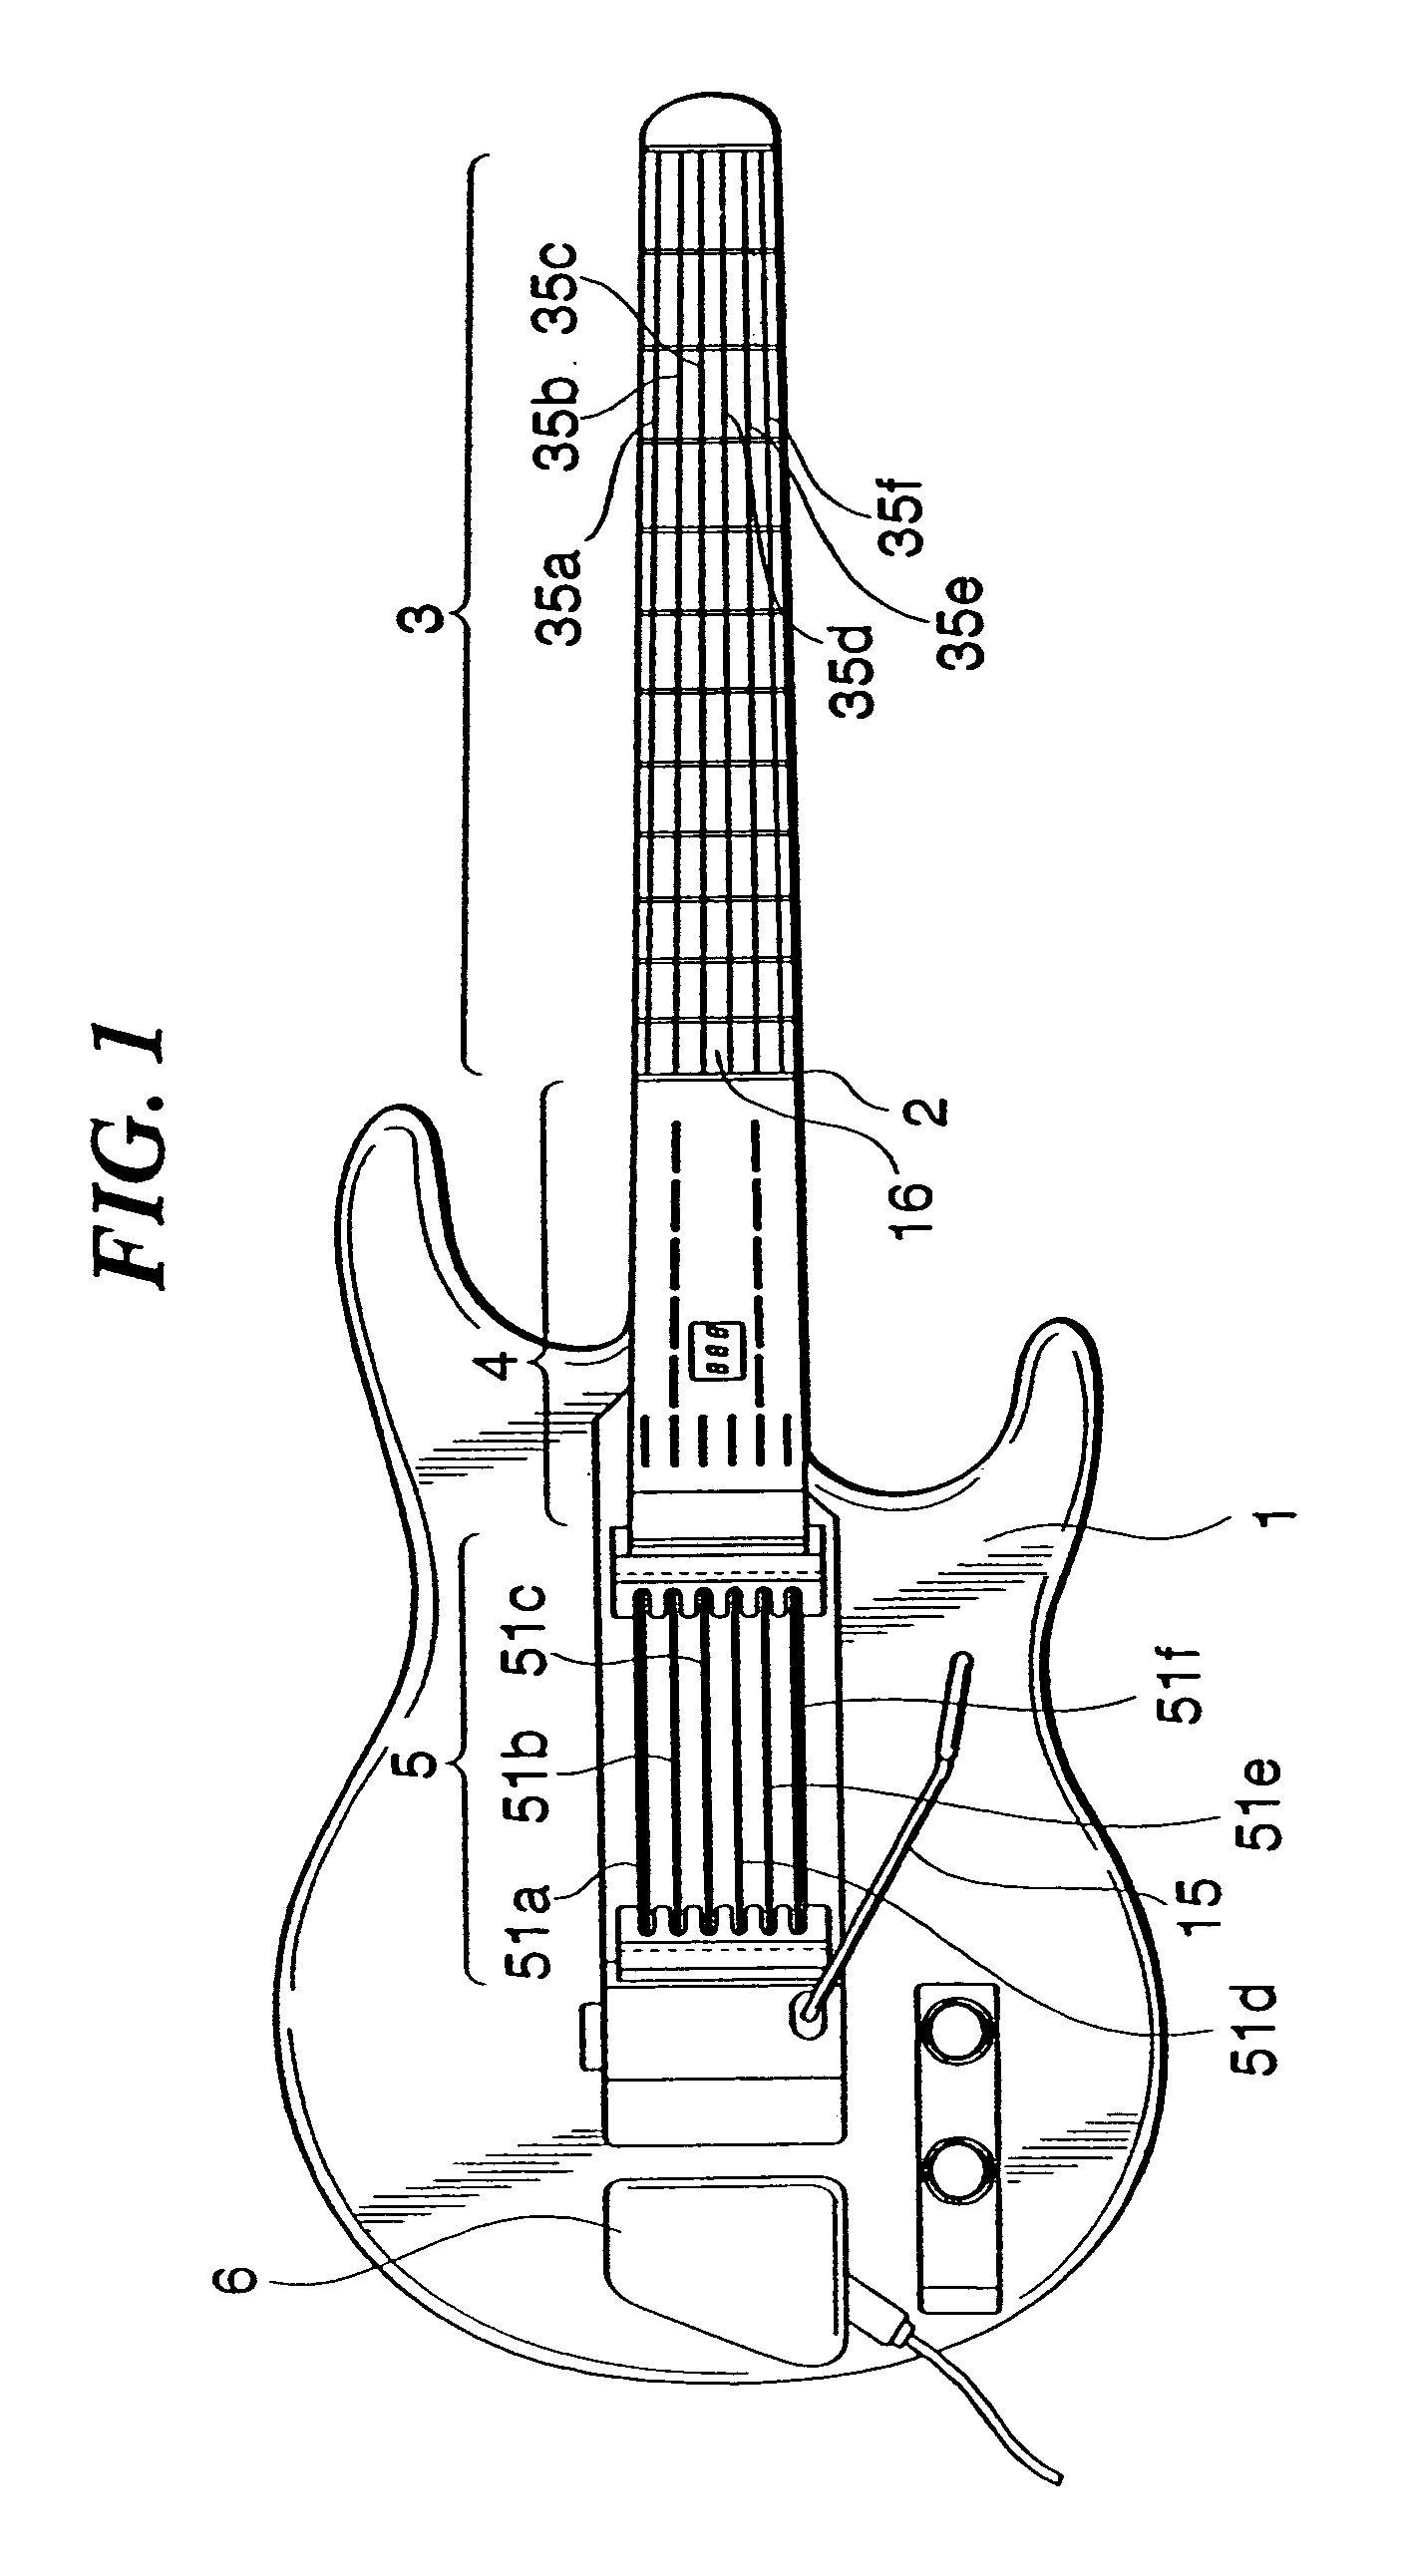 Electronic musical instrument